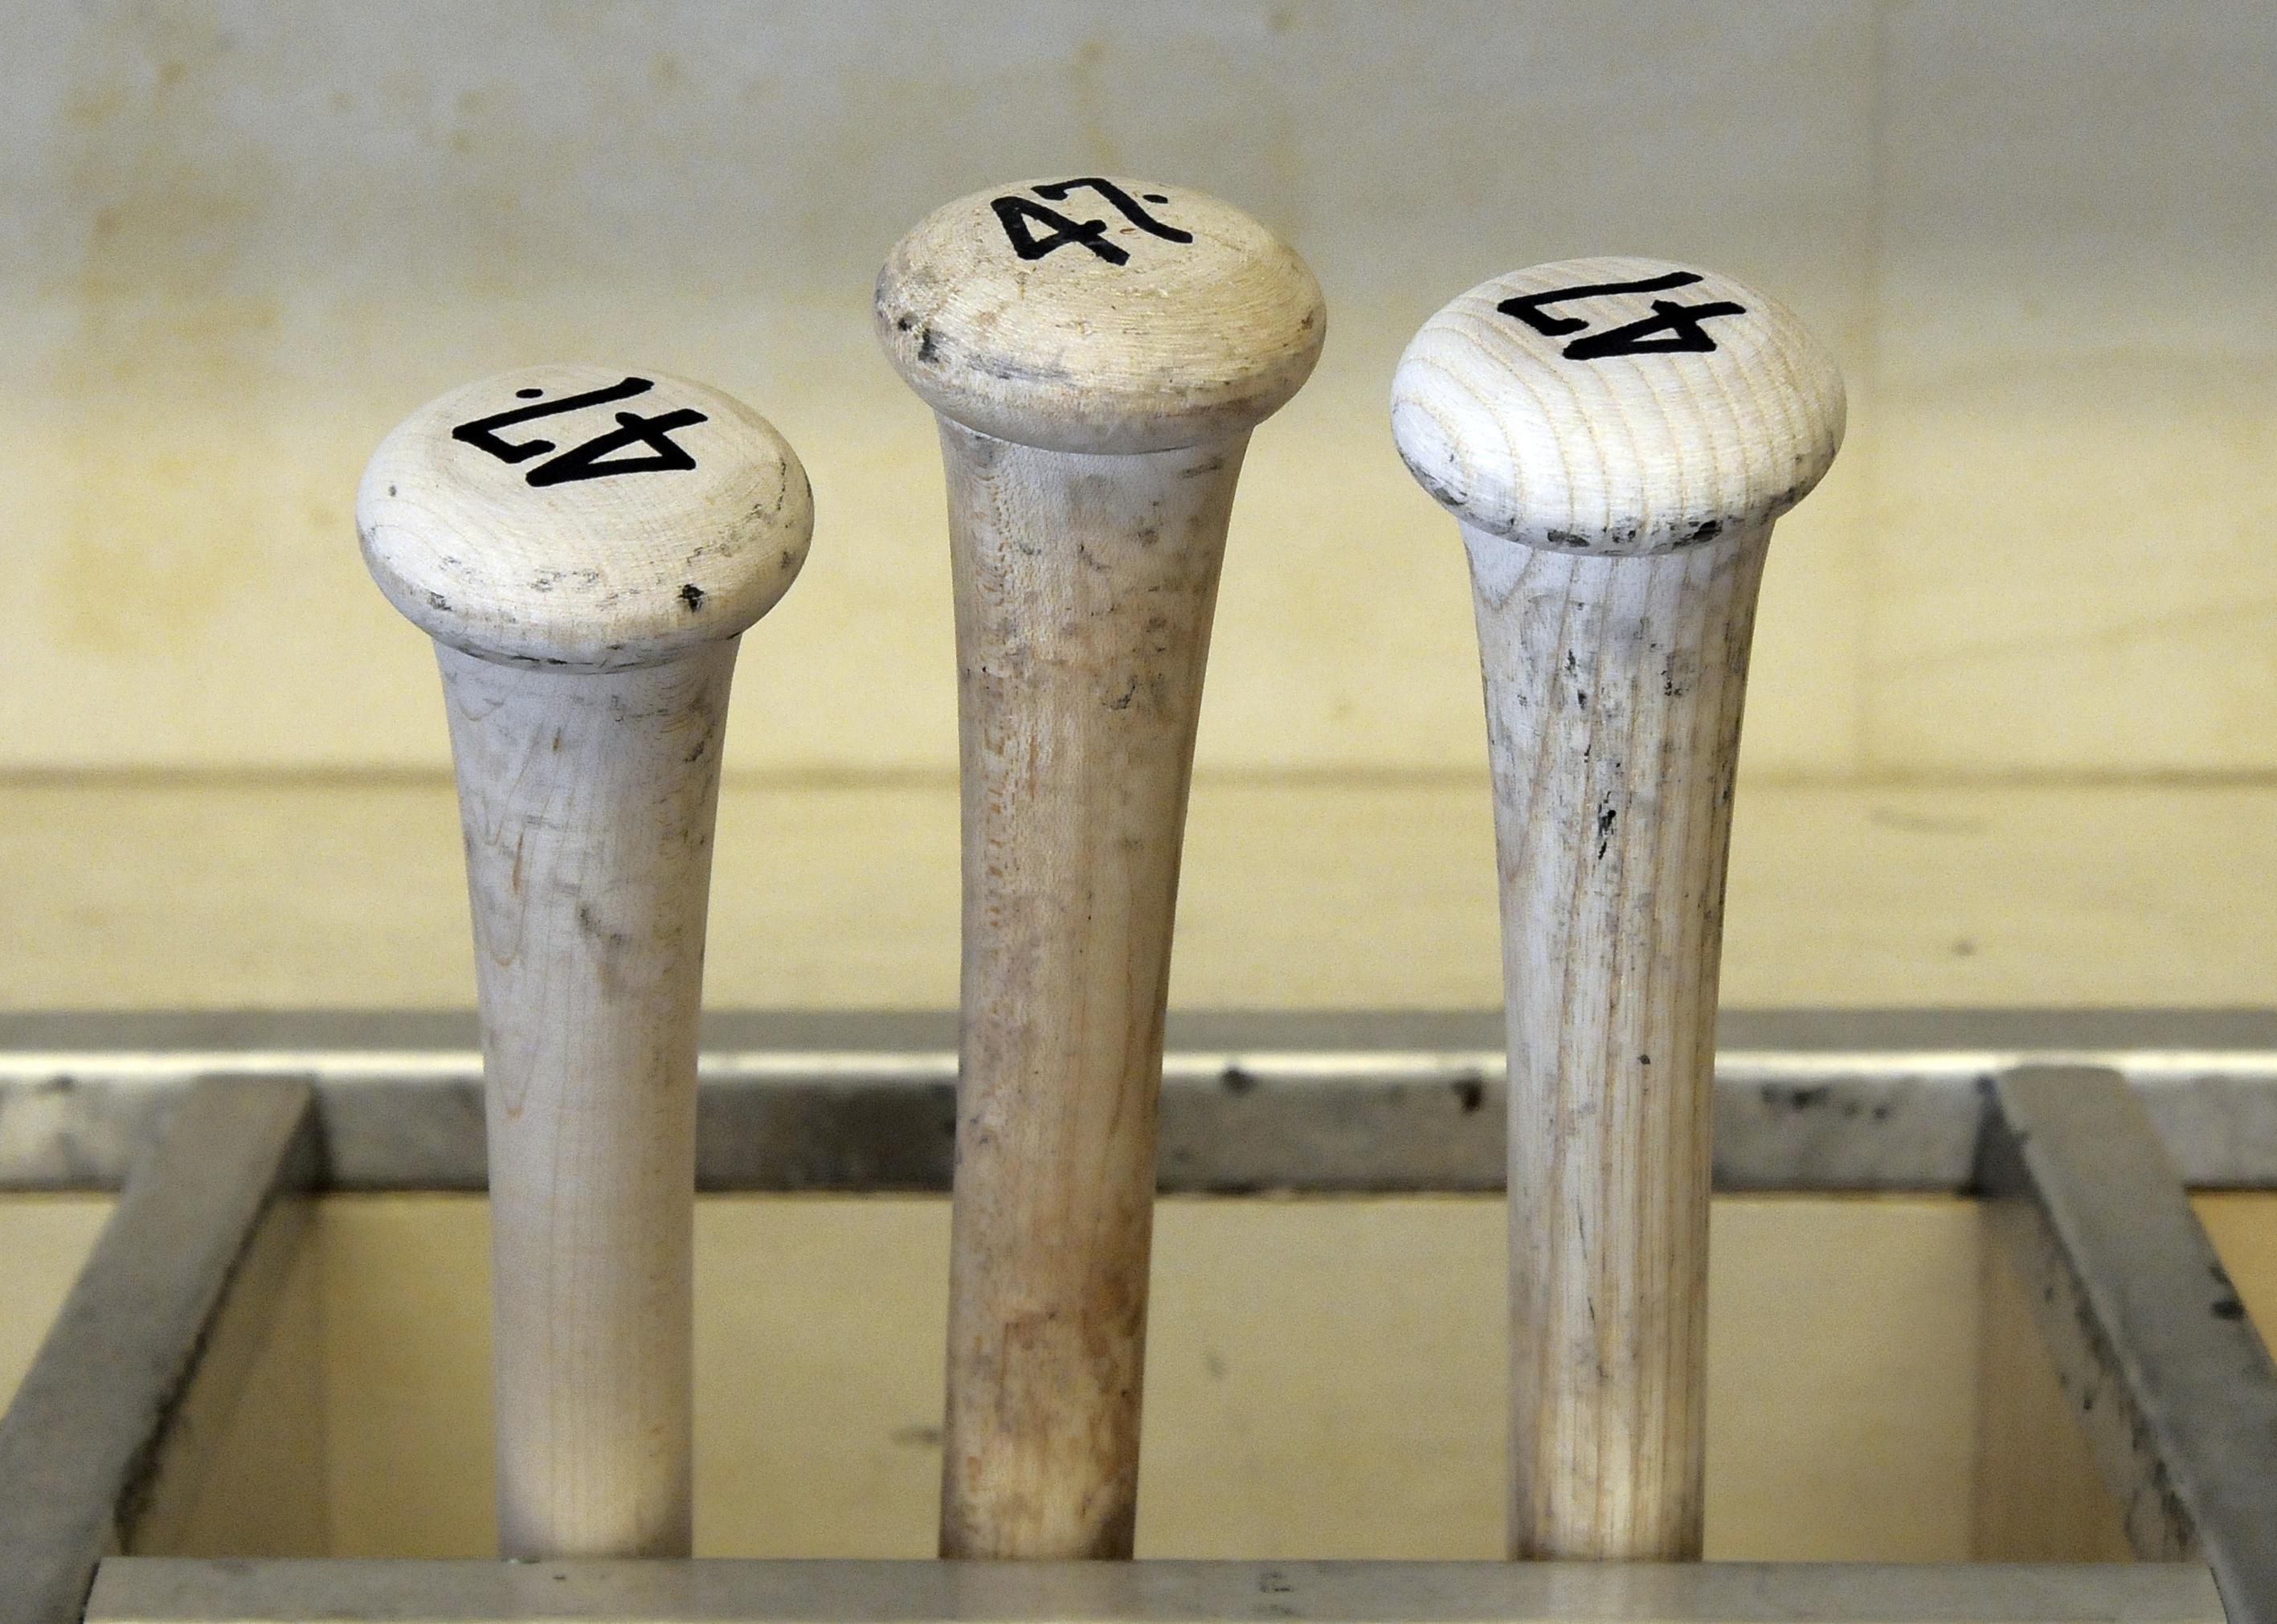 Bats in the bat rack before an MLB game.